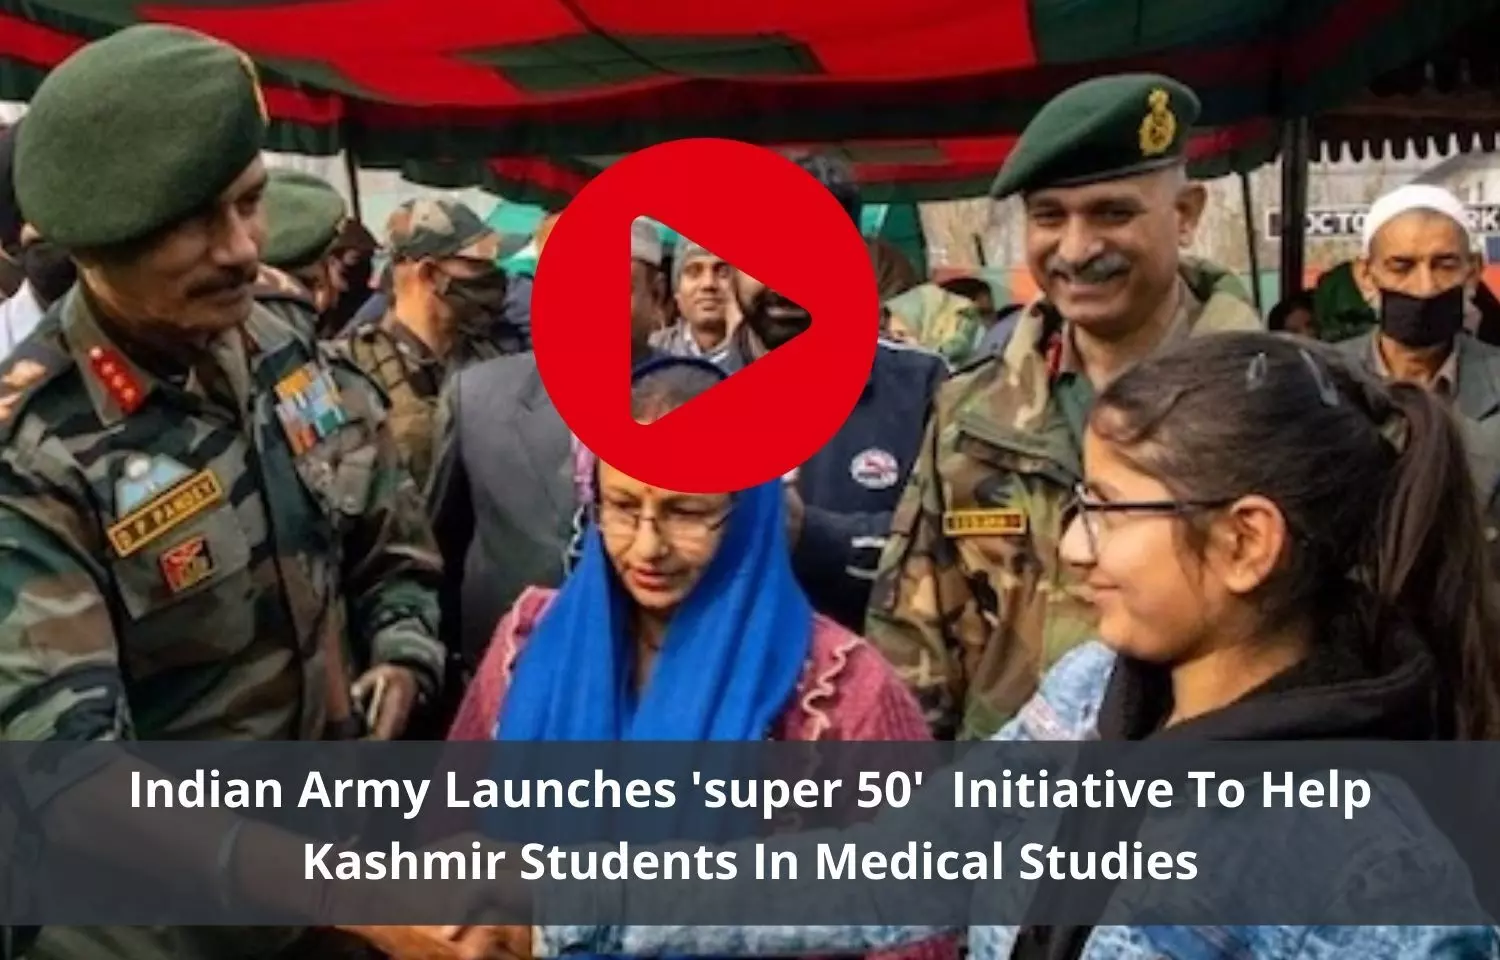 Good news for Kashmir Medical students: Indian army launches free education under Super 50 initiative